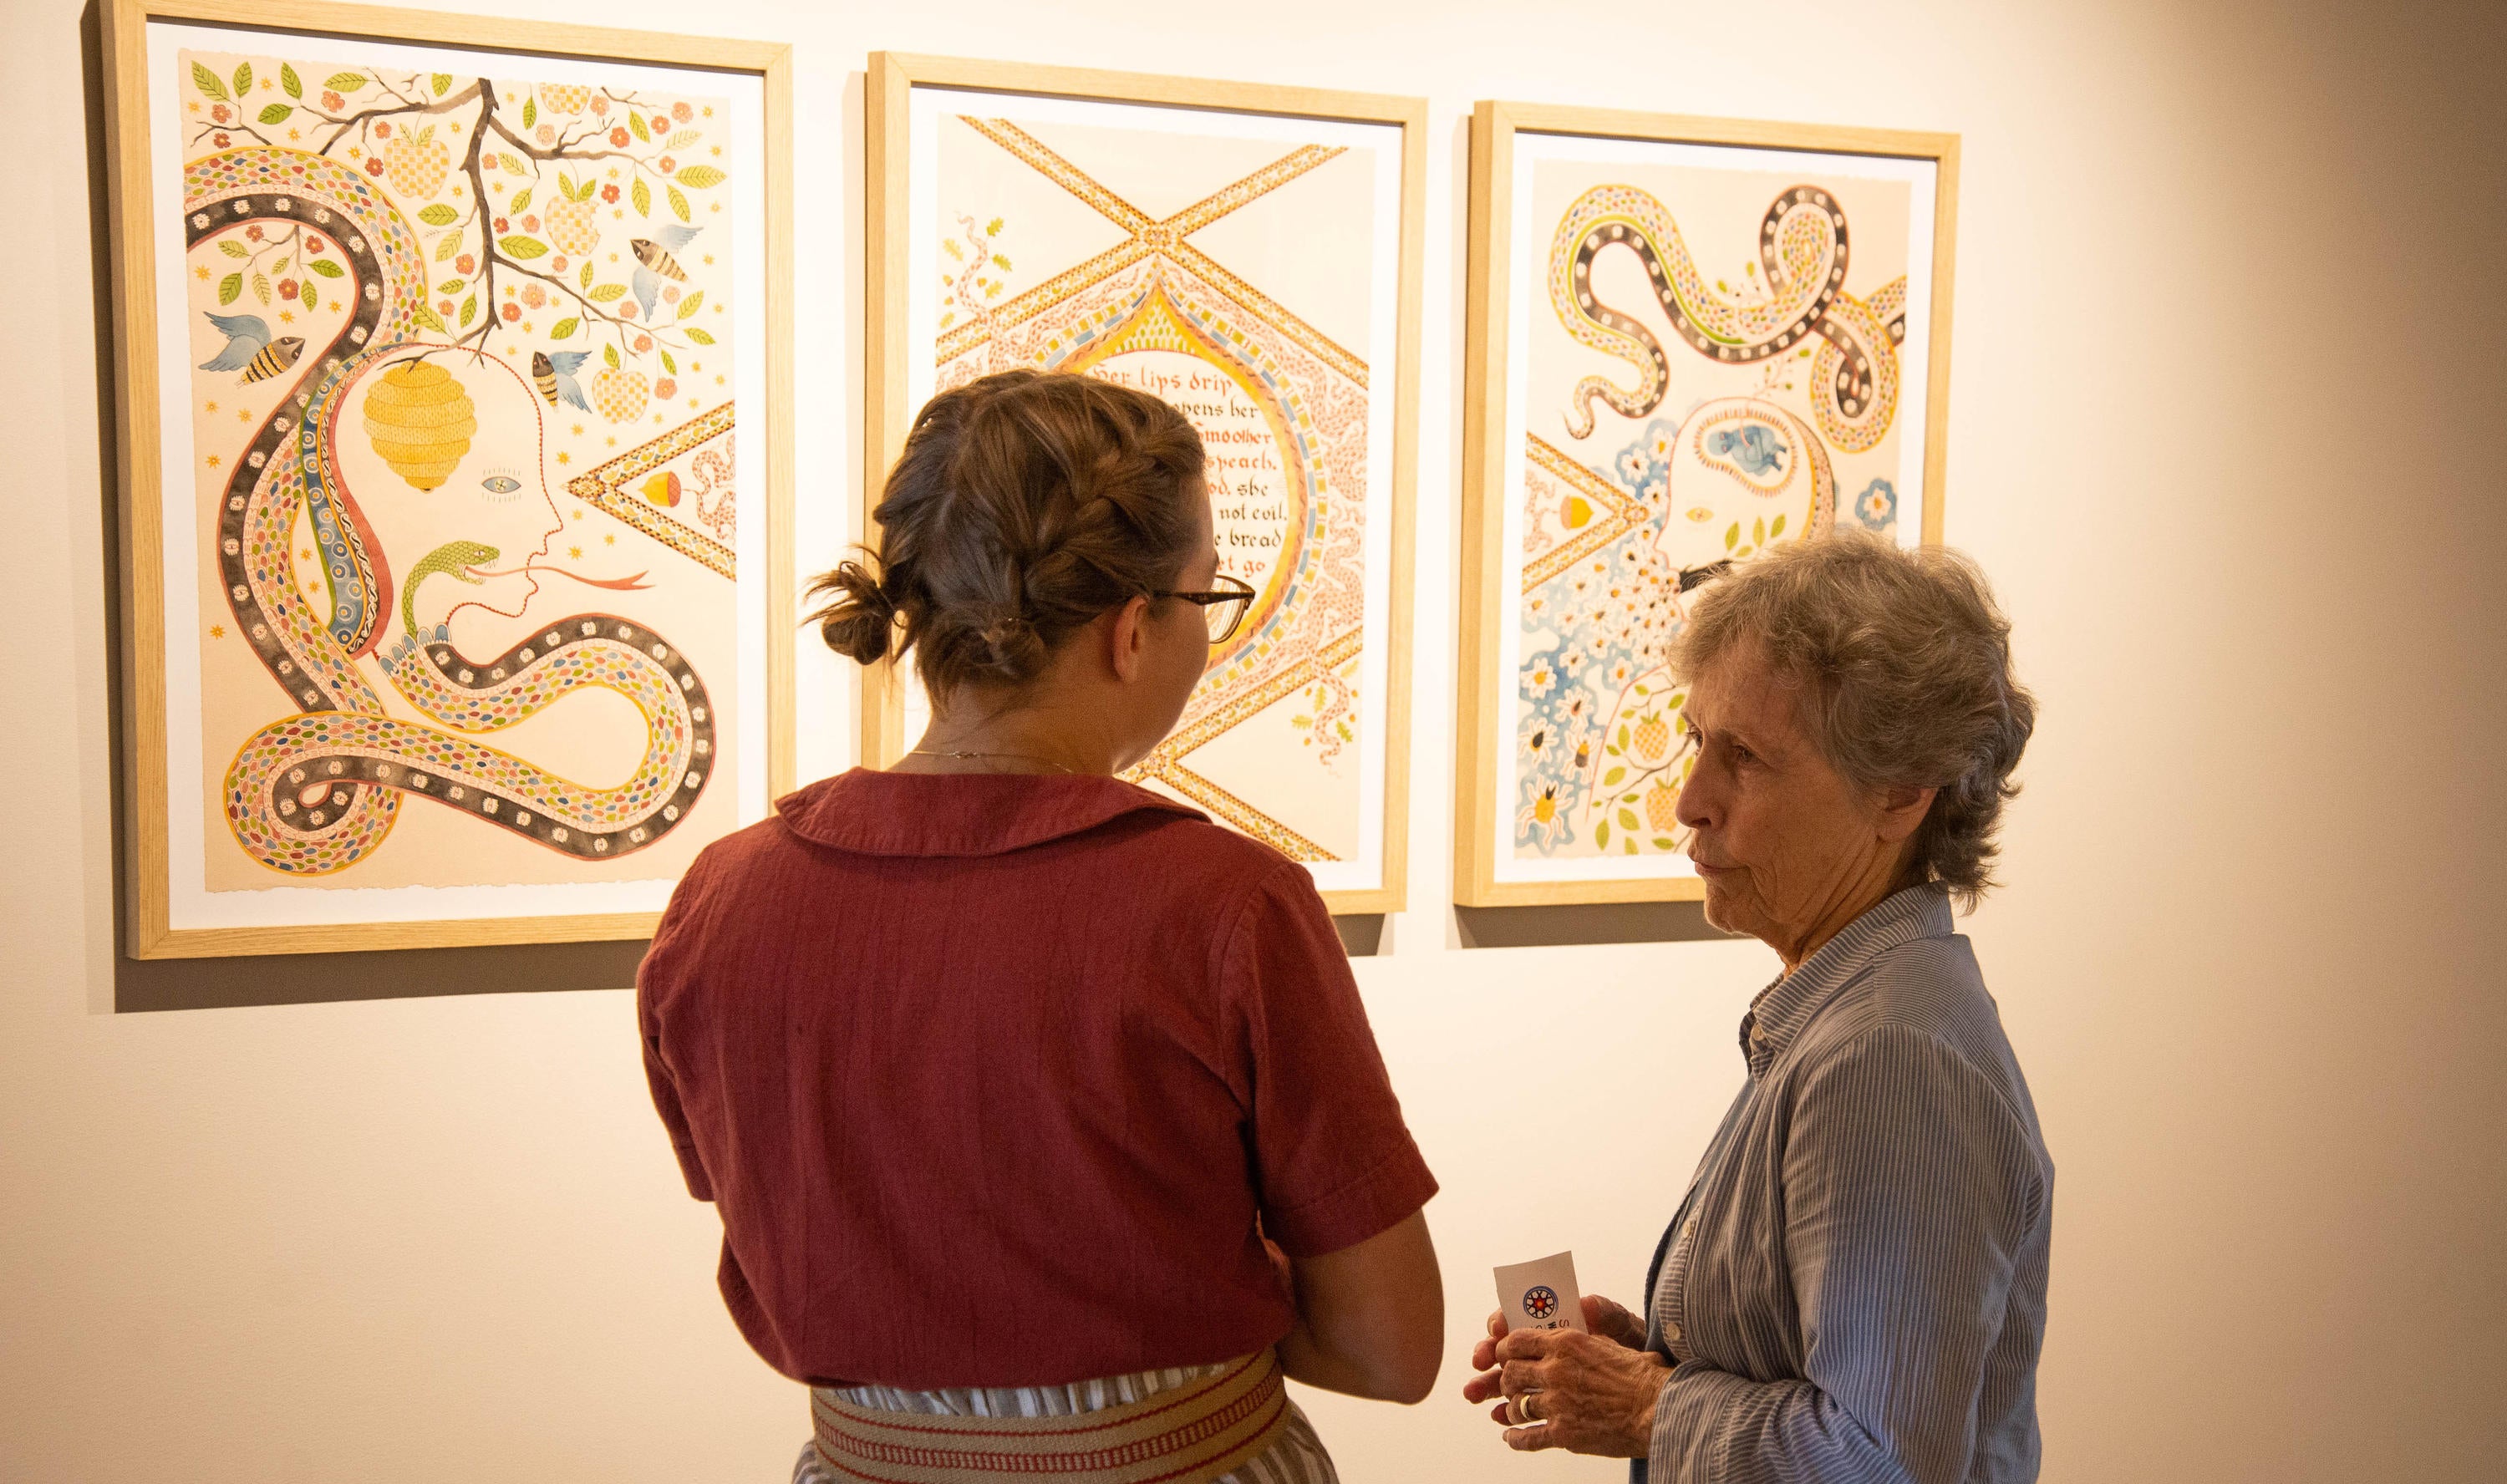 Meg Harder speaking with event attendee about her artwork.